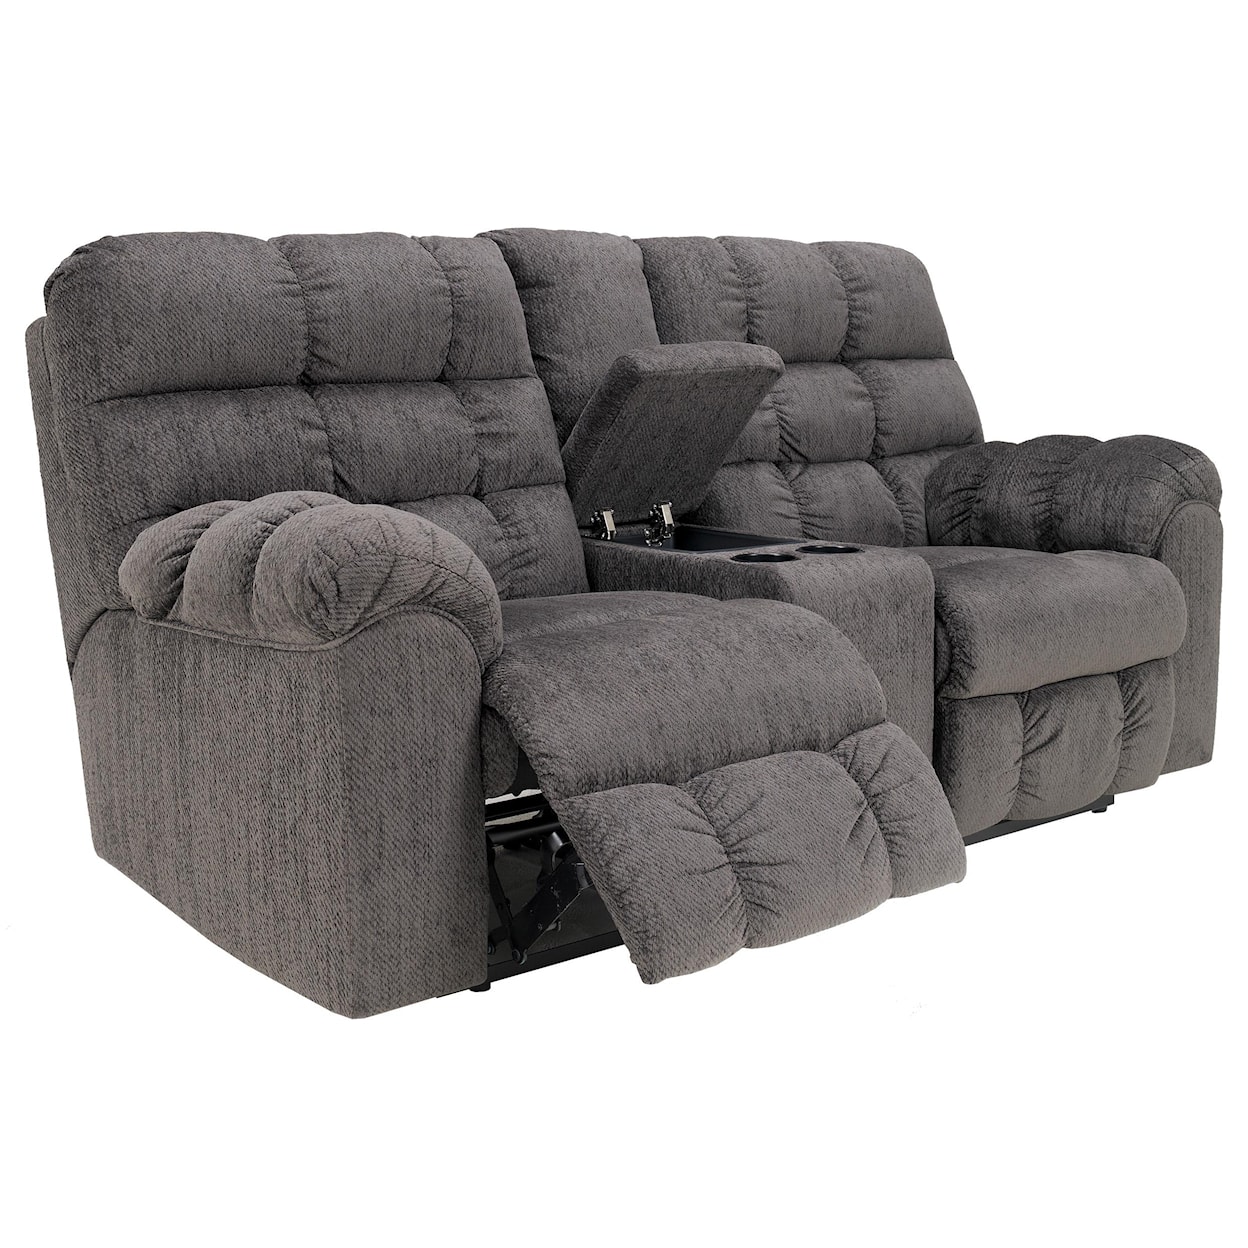 Ashley Acieona - Slate Double Reclining Loveseat with Console